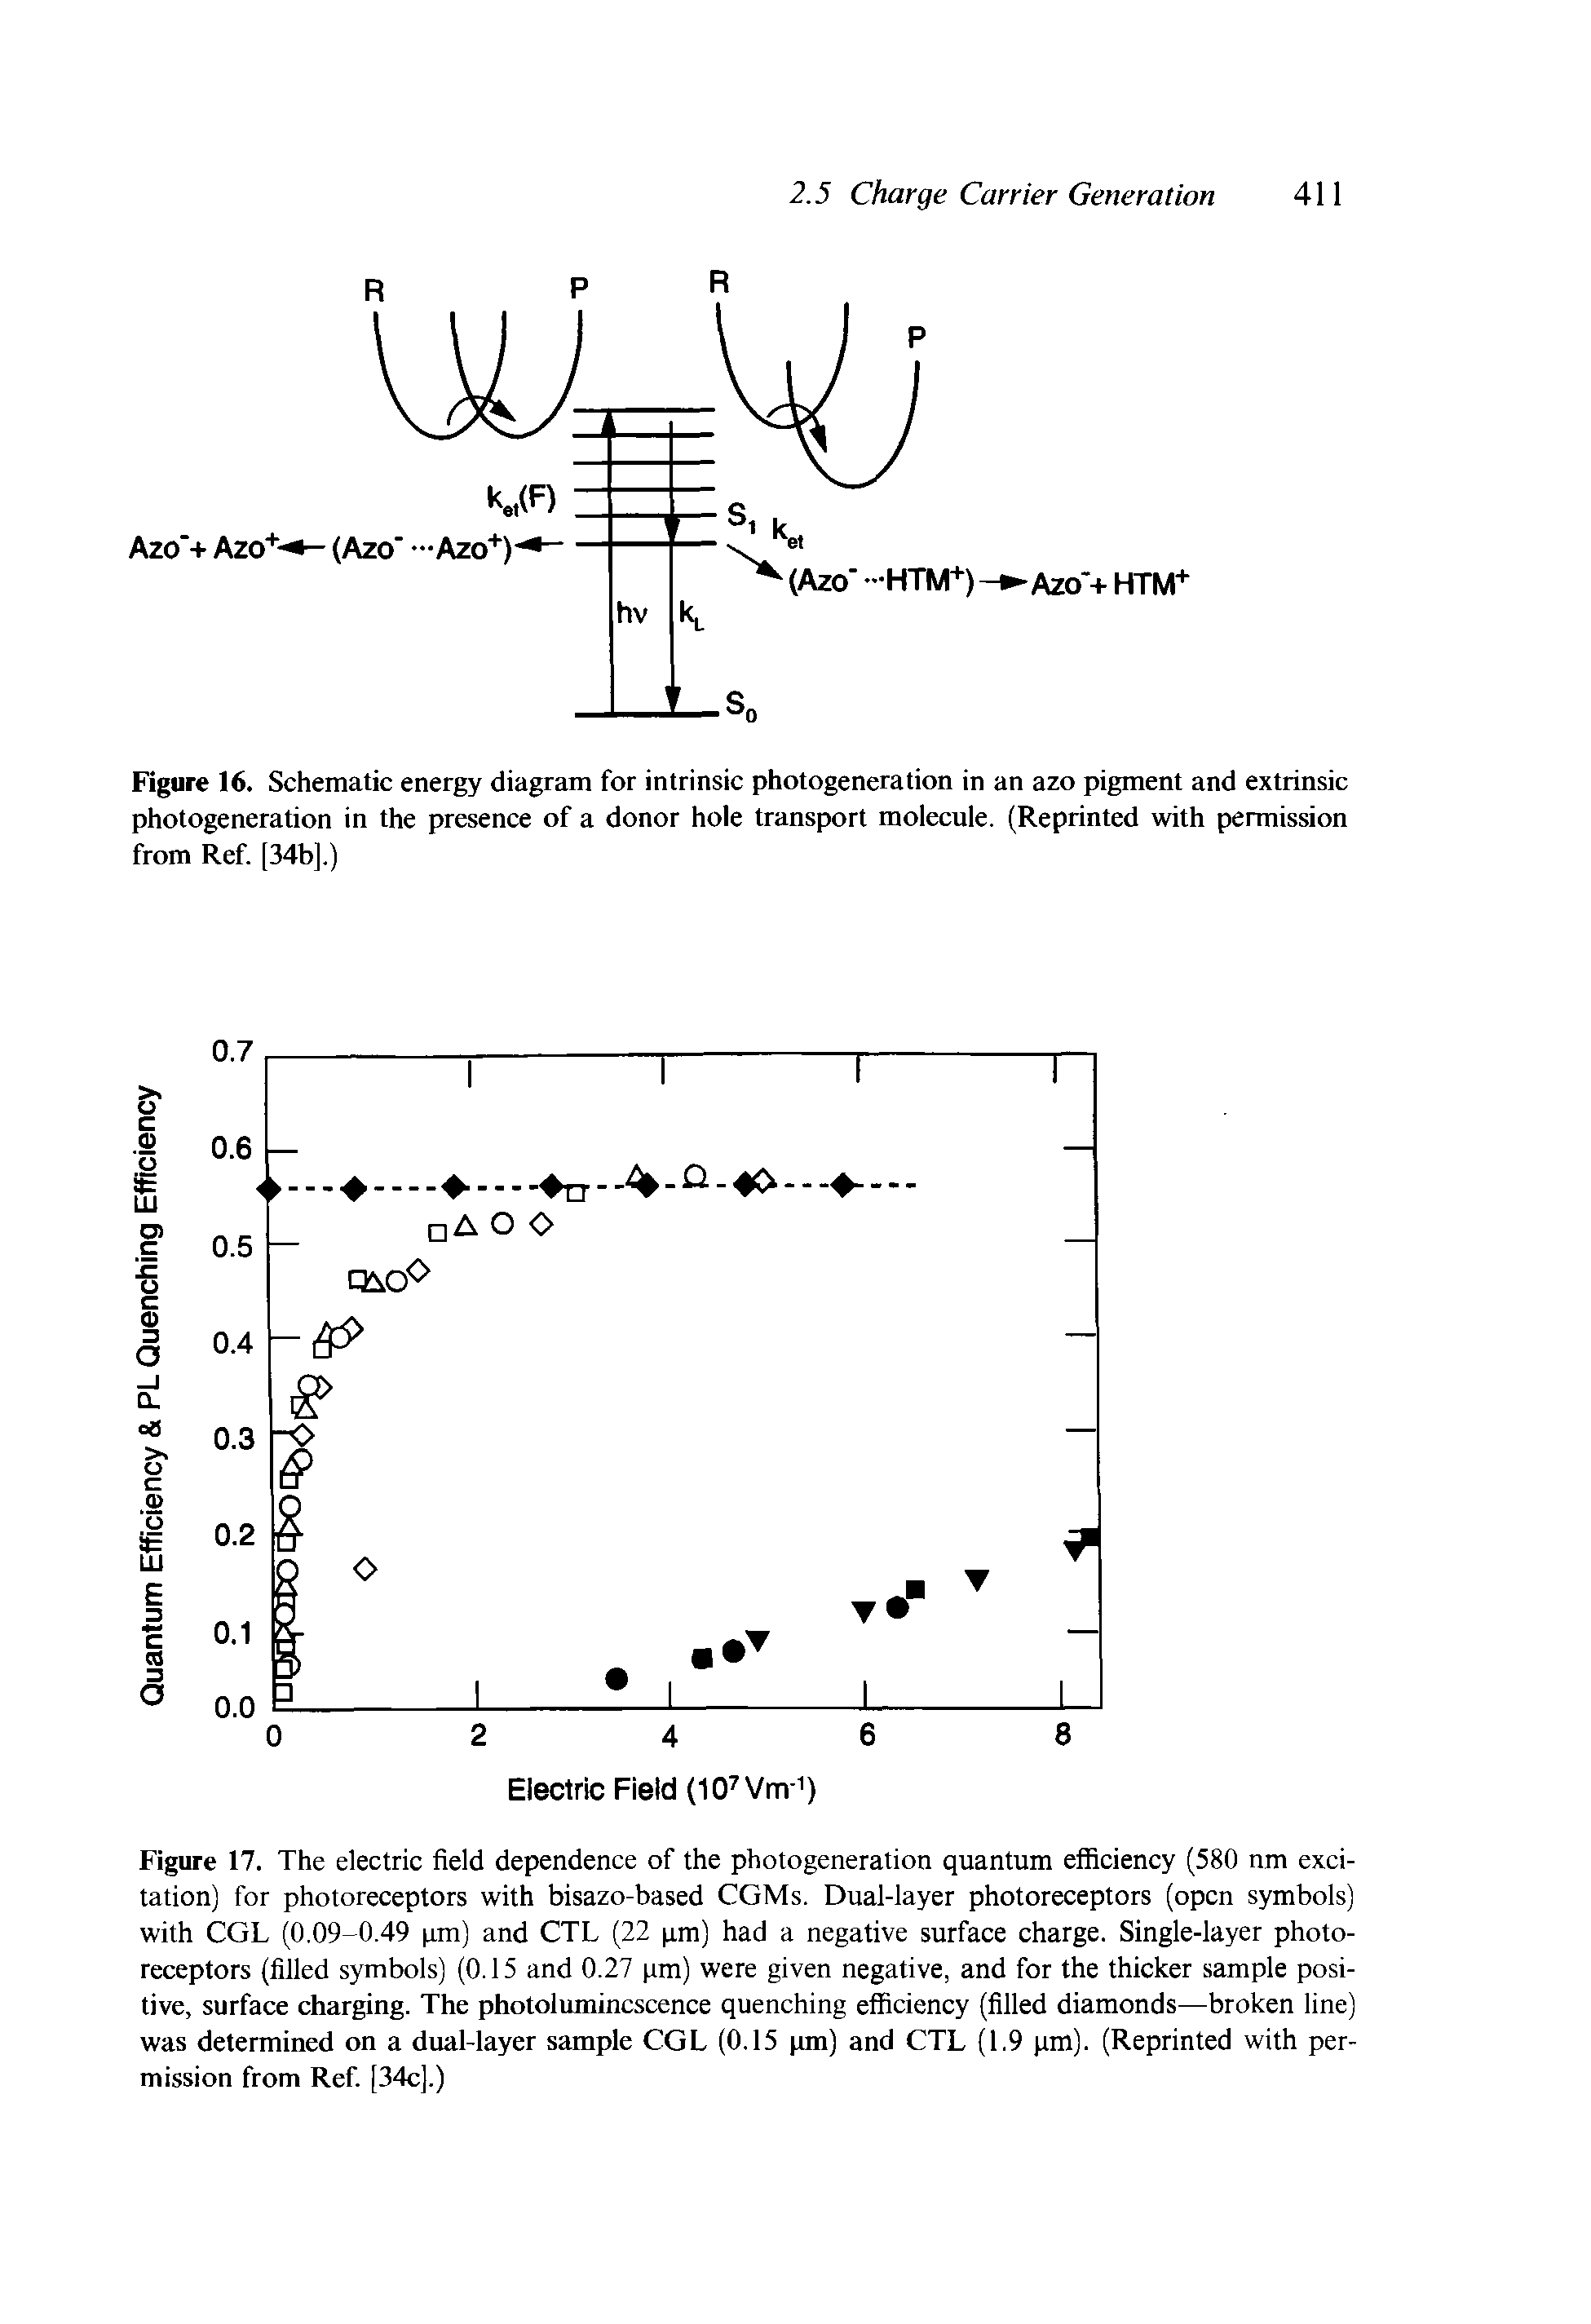 Figure 16. Schematic energy diagram for intrinsic photogeneration in an azo pigment and extrinsic photogeneration in the presence of a donor hole transport molecule. (Reprinted with permission from Ref. [34b].)...